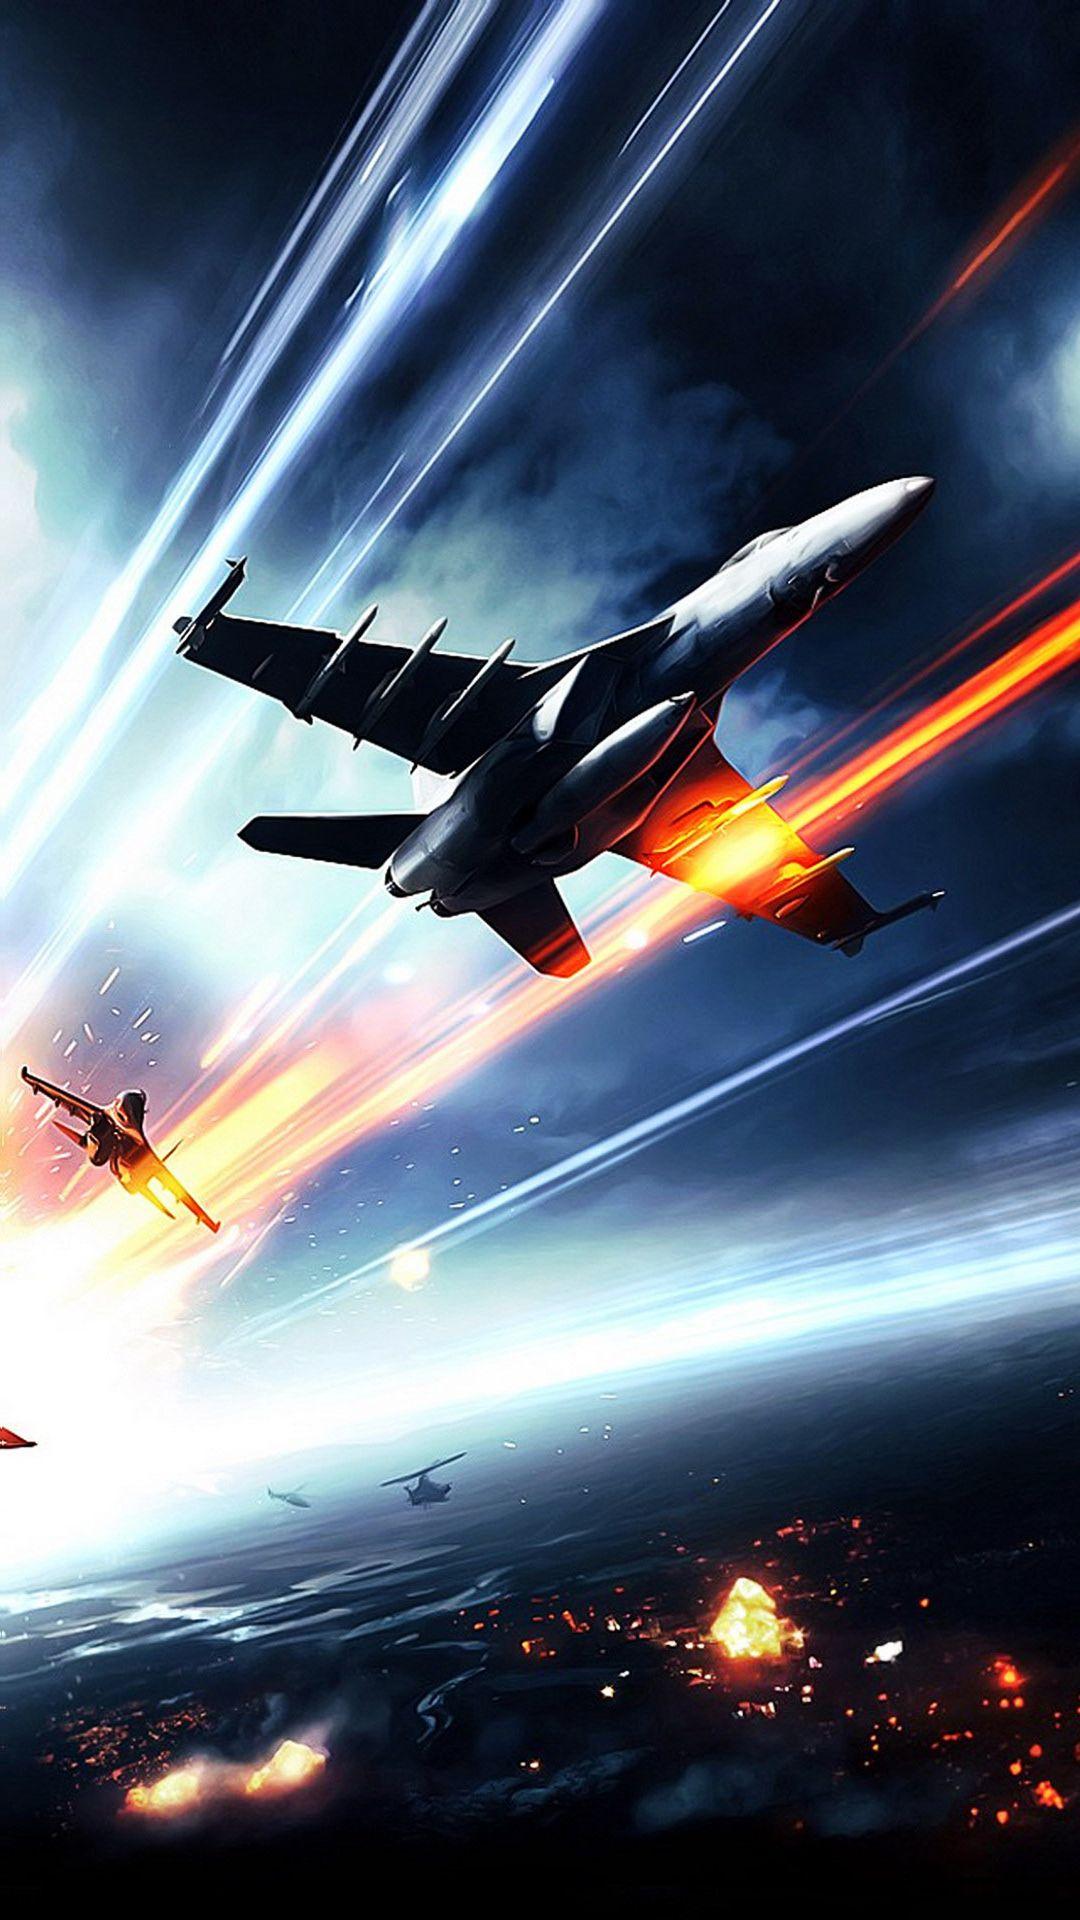 BF Air Combat HD Wallpaper For Your Mobile Phone